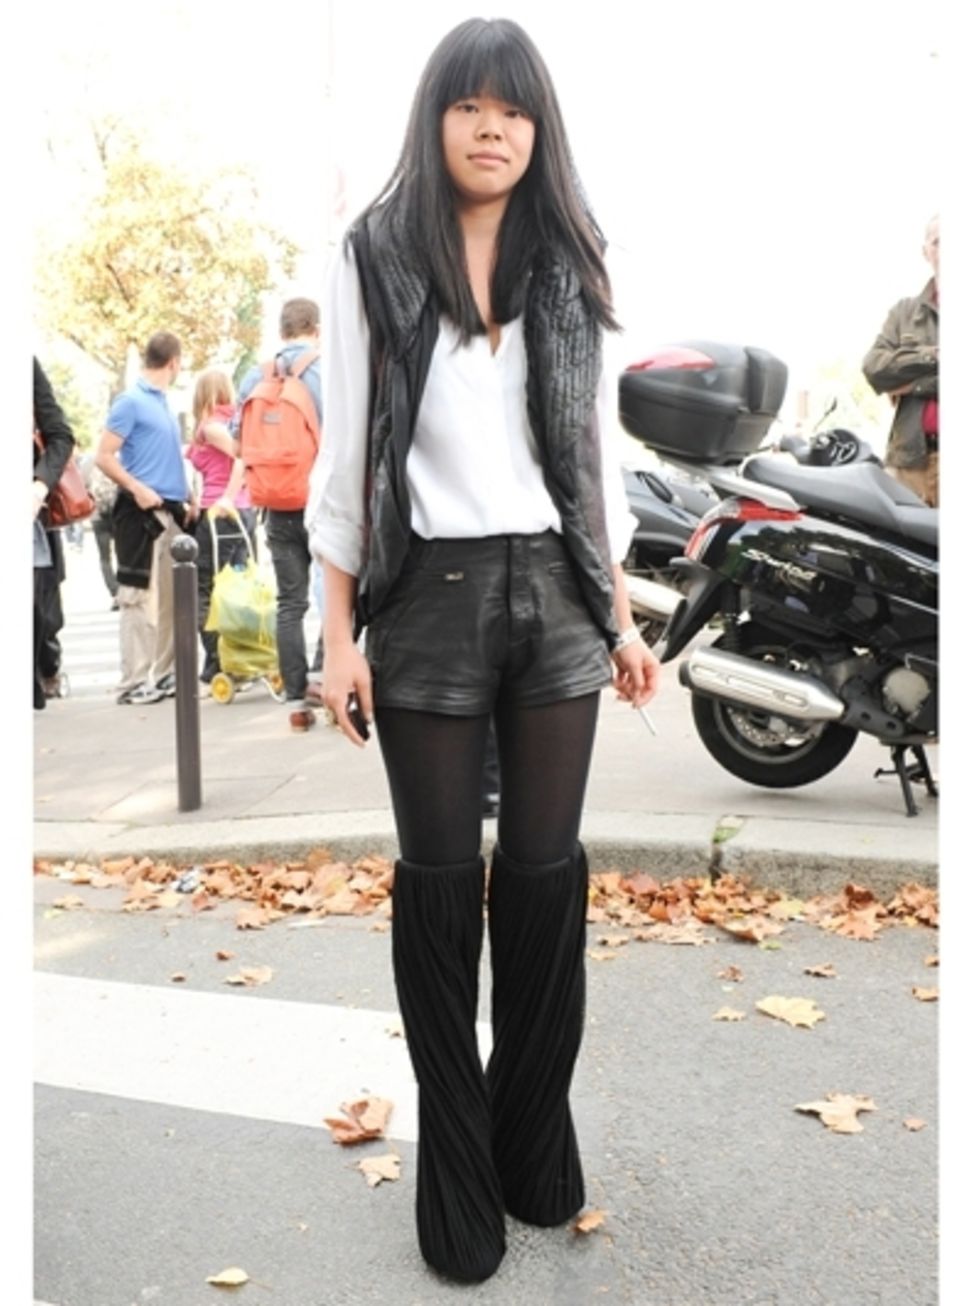 Clothing, Trousers, Motorcycle, Textile, Outerwear, Style, Fender, Denim, Street fashion, Leather, 